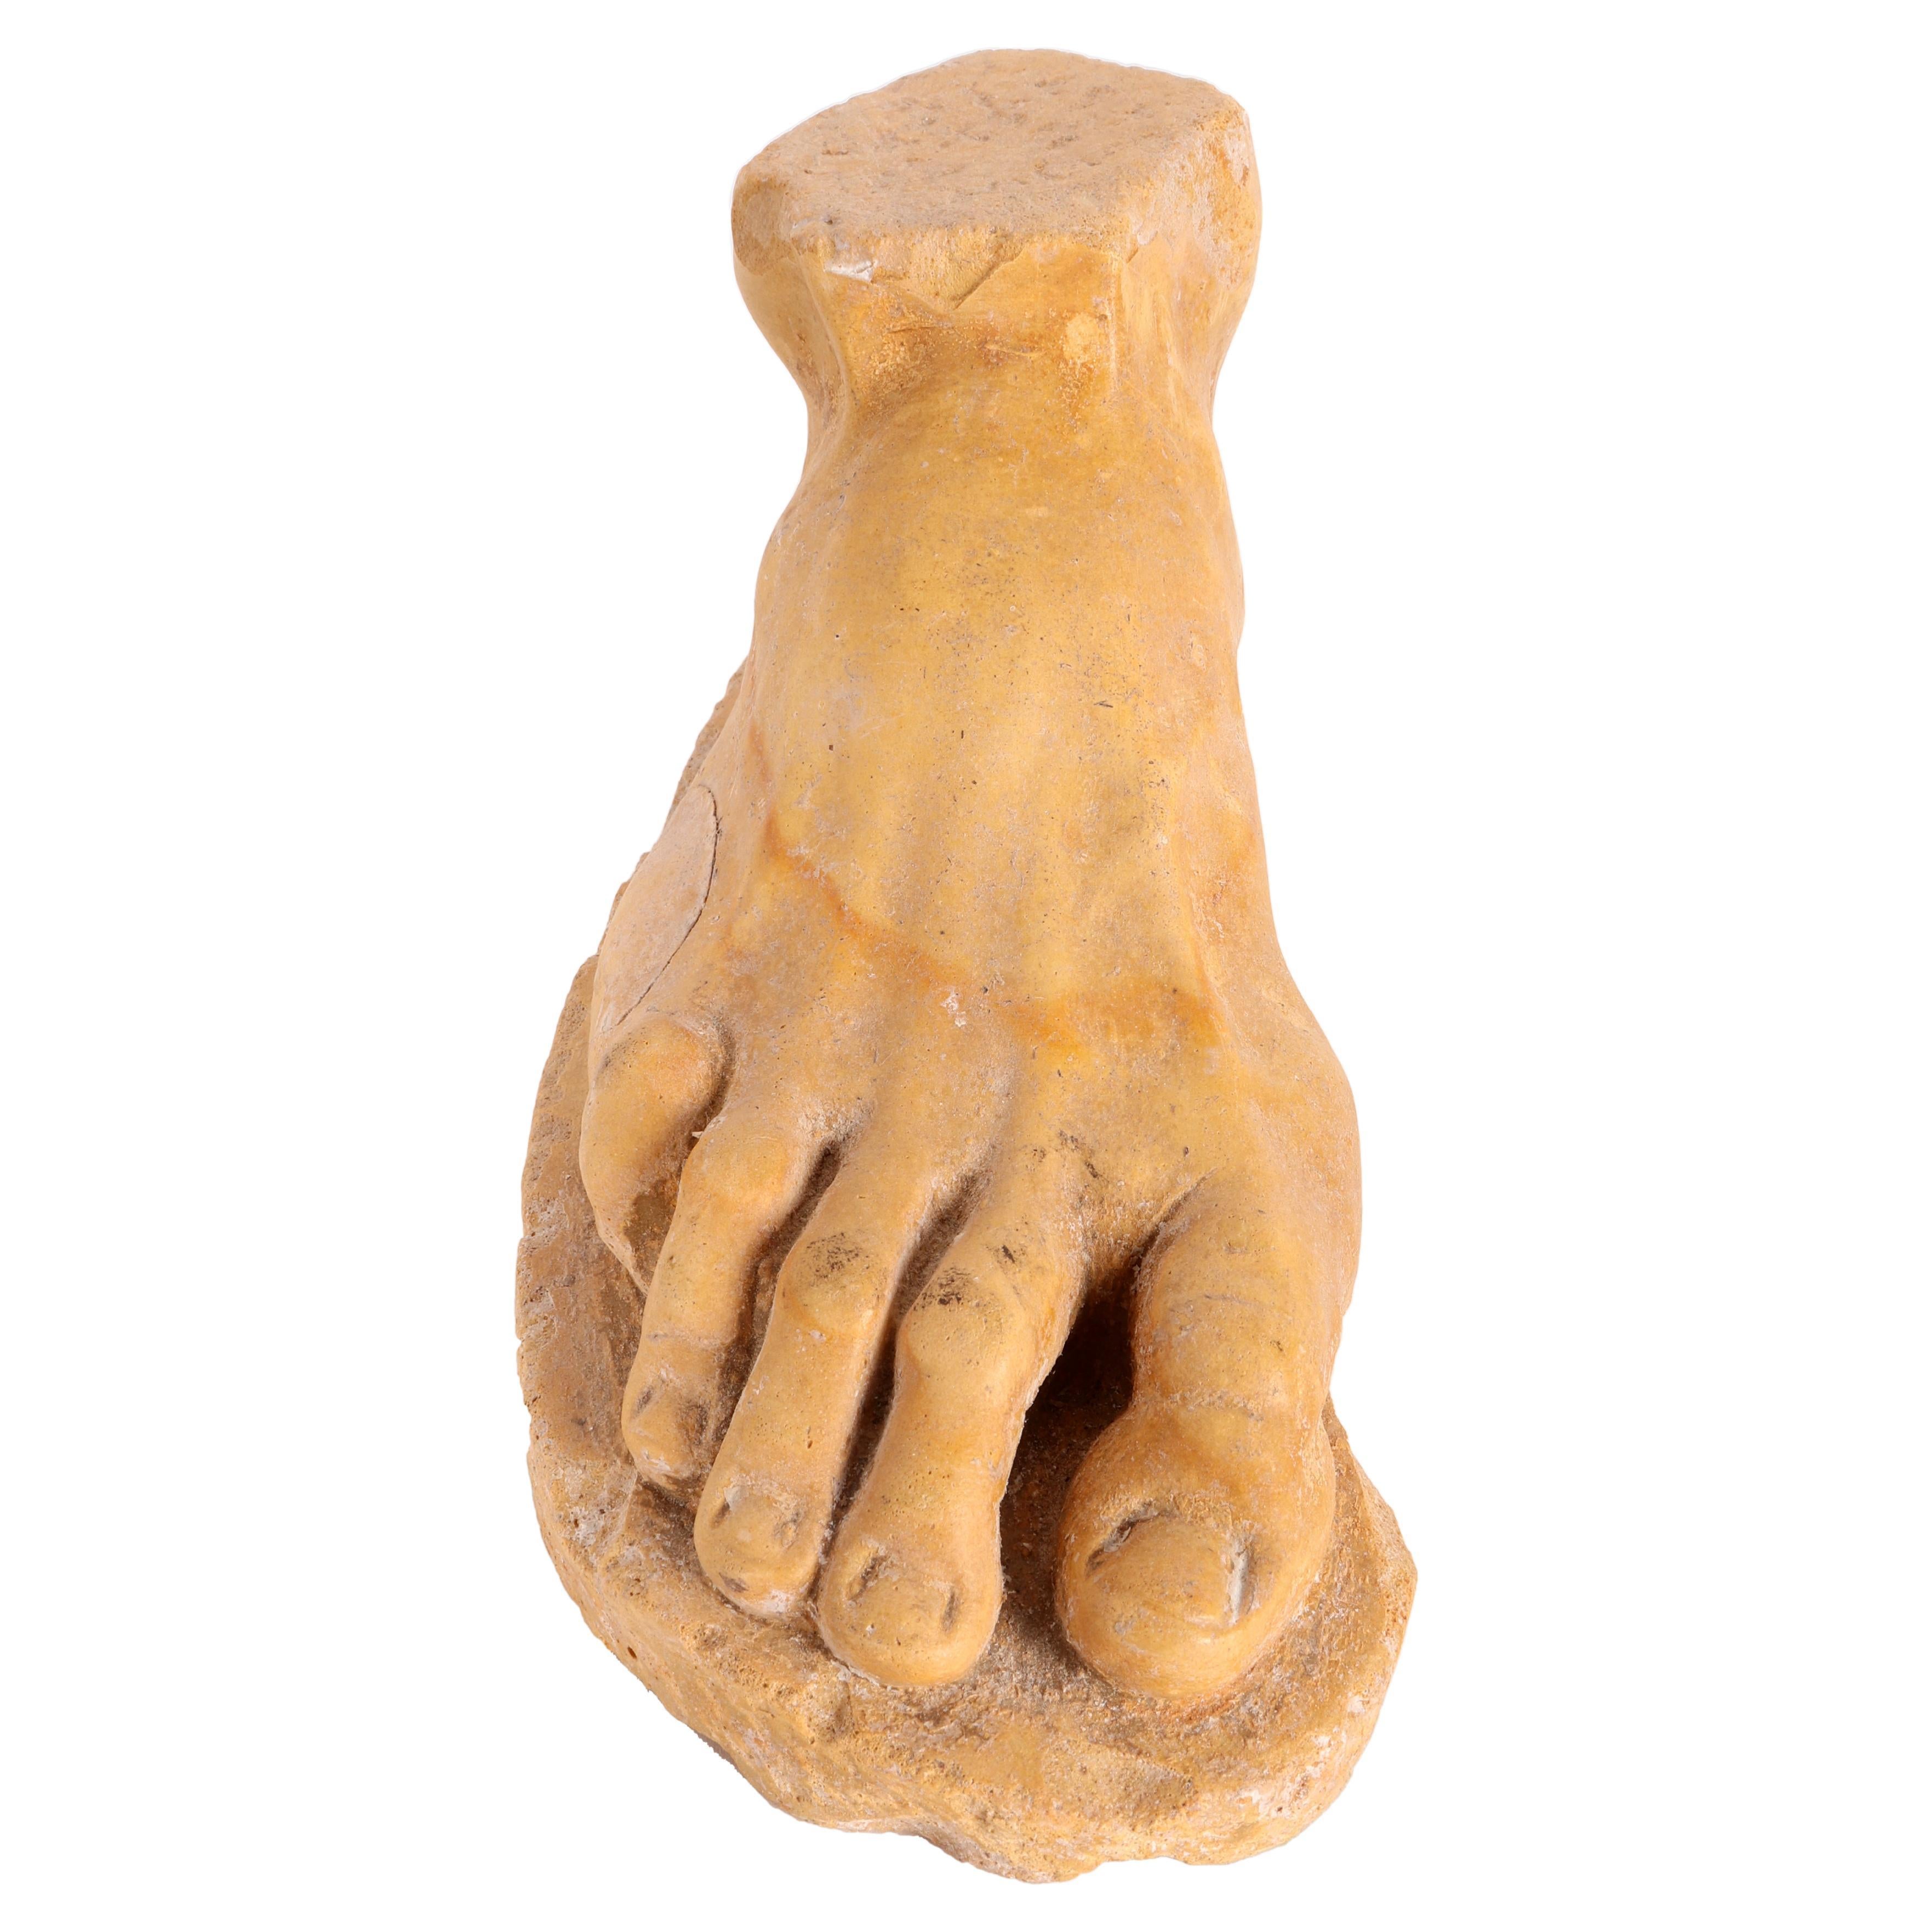 Sculpture of a Foot in Yellow Marble from Siena, Italy 1820